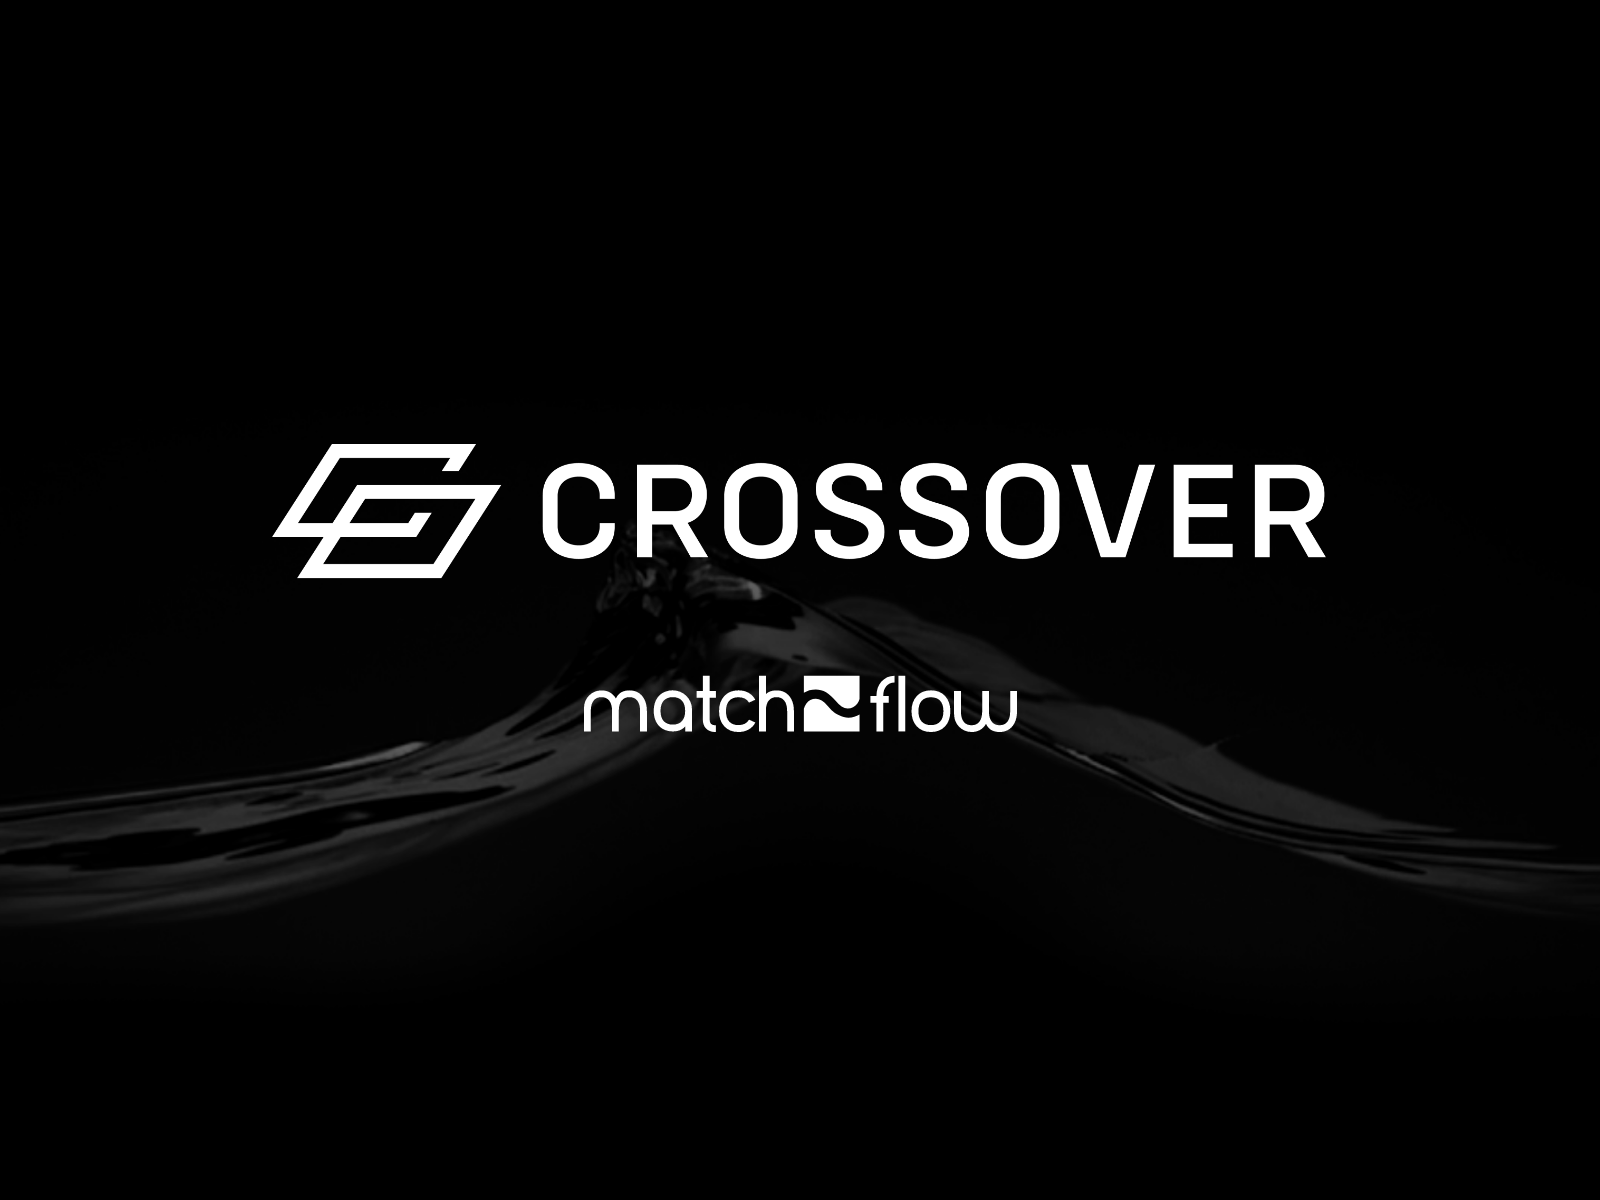 Crossover – new partnership announcement